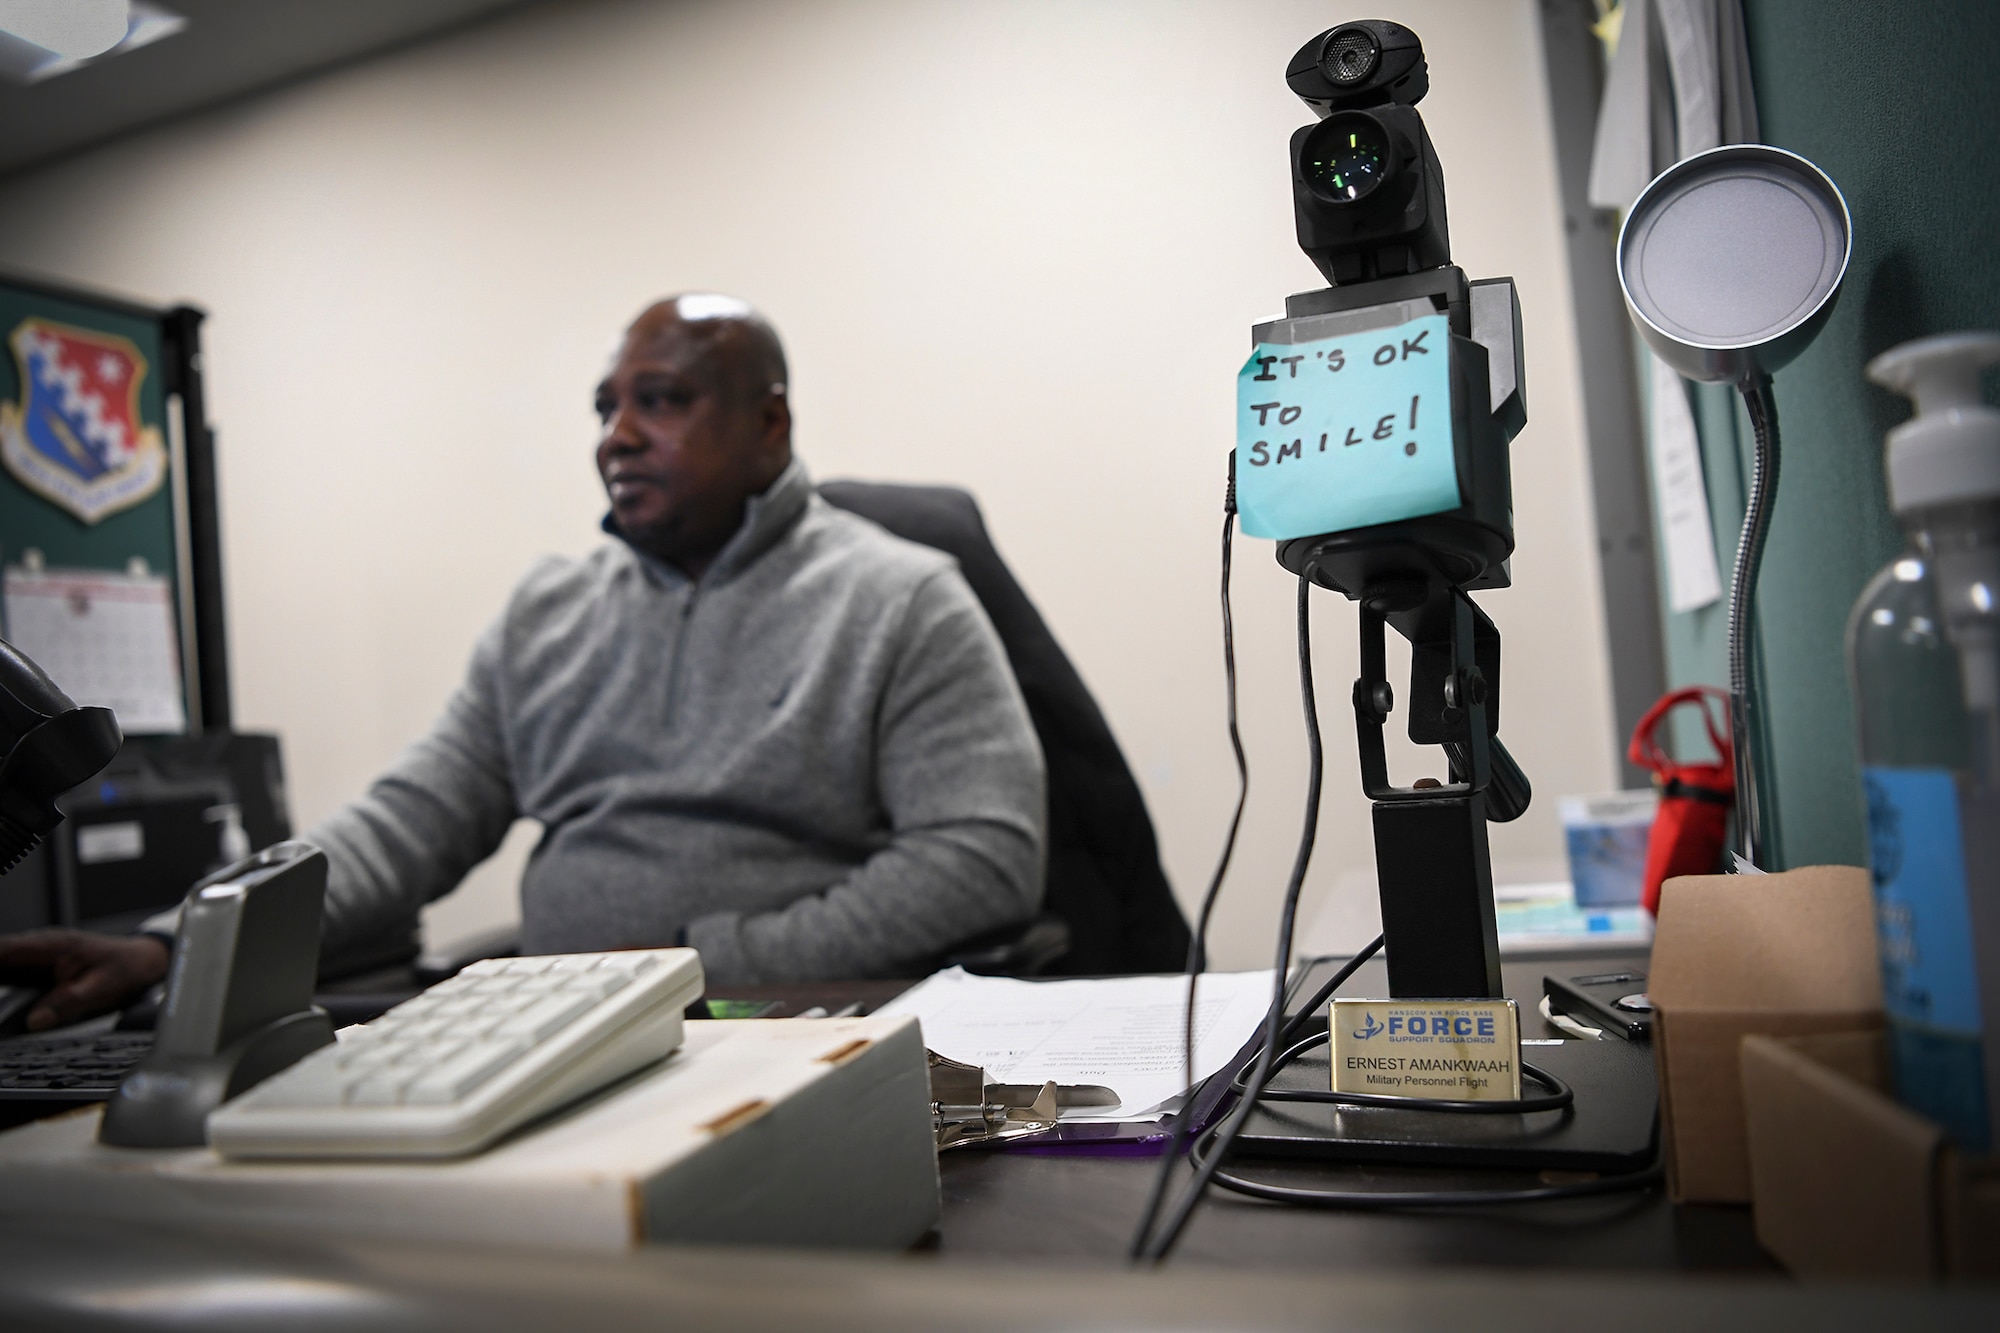 Ernest Amankwaah, 66th Force Support Squadron Military Personnel Flight customer service technician, reviews documents and trainings at his desk at Hanscom Air Force Base, Mass., Dec. 15. Amankwaah immigrated to the U.S. from Ghana in 1999 after being selected for a permanent resident visa through the Diversity Immigration Visa Program. (U.S. Air Force photo by Lauren Russell)